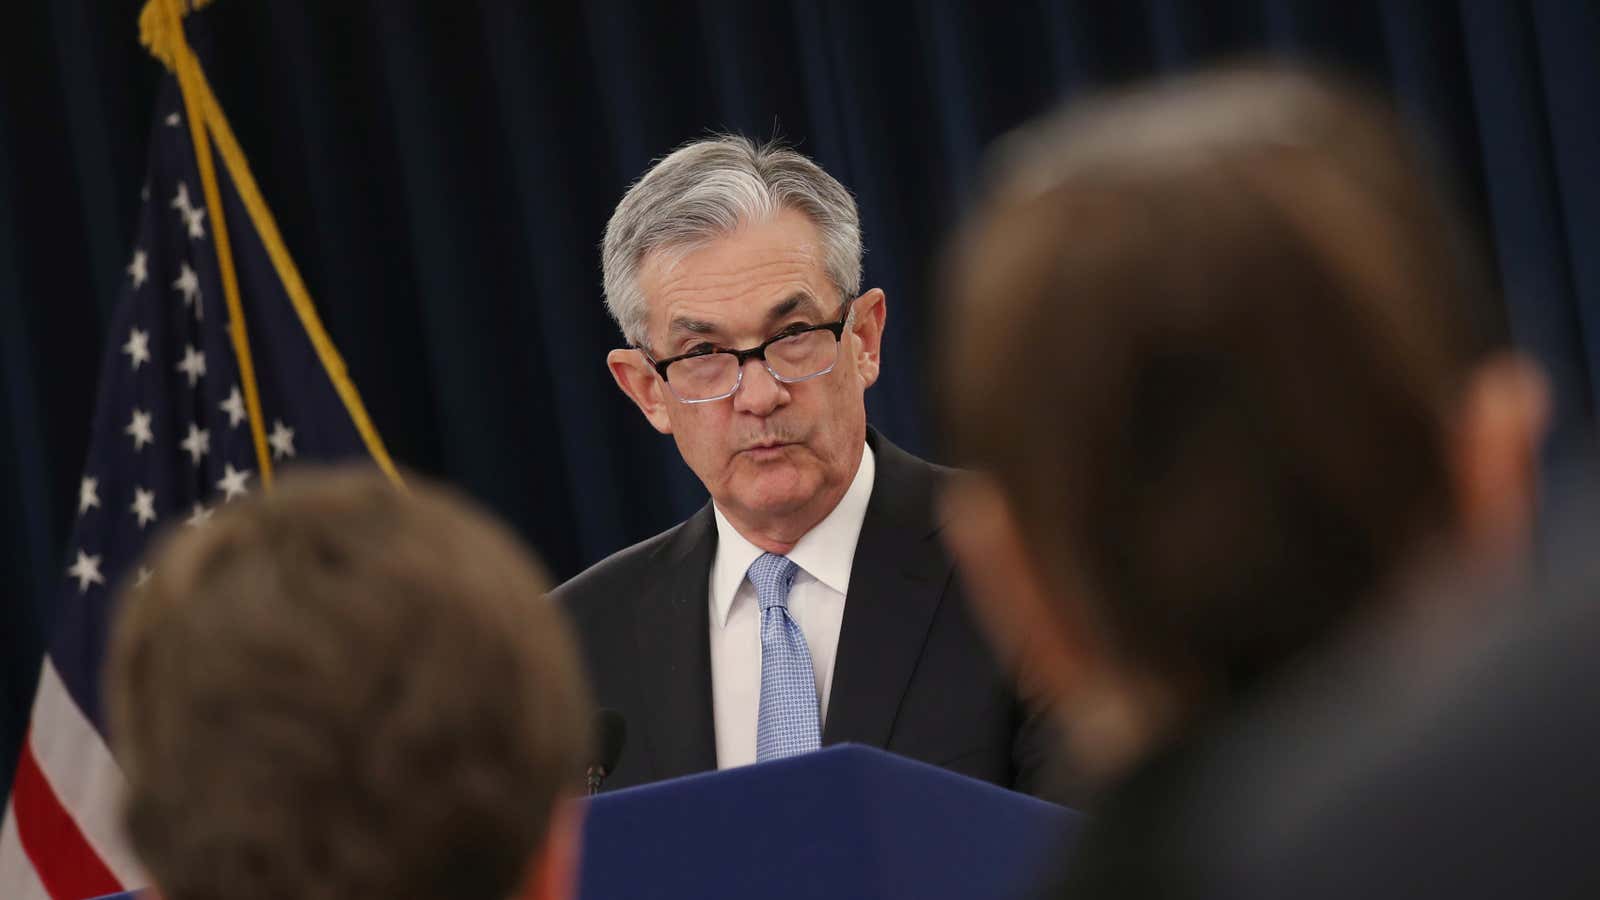 Fed chair Powell will face some tough questions.